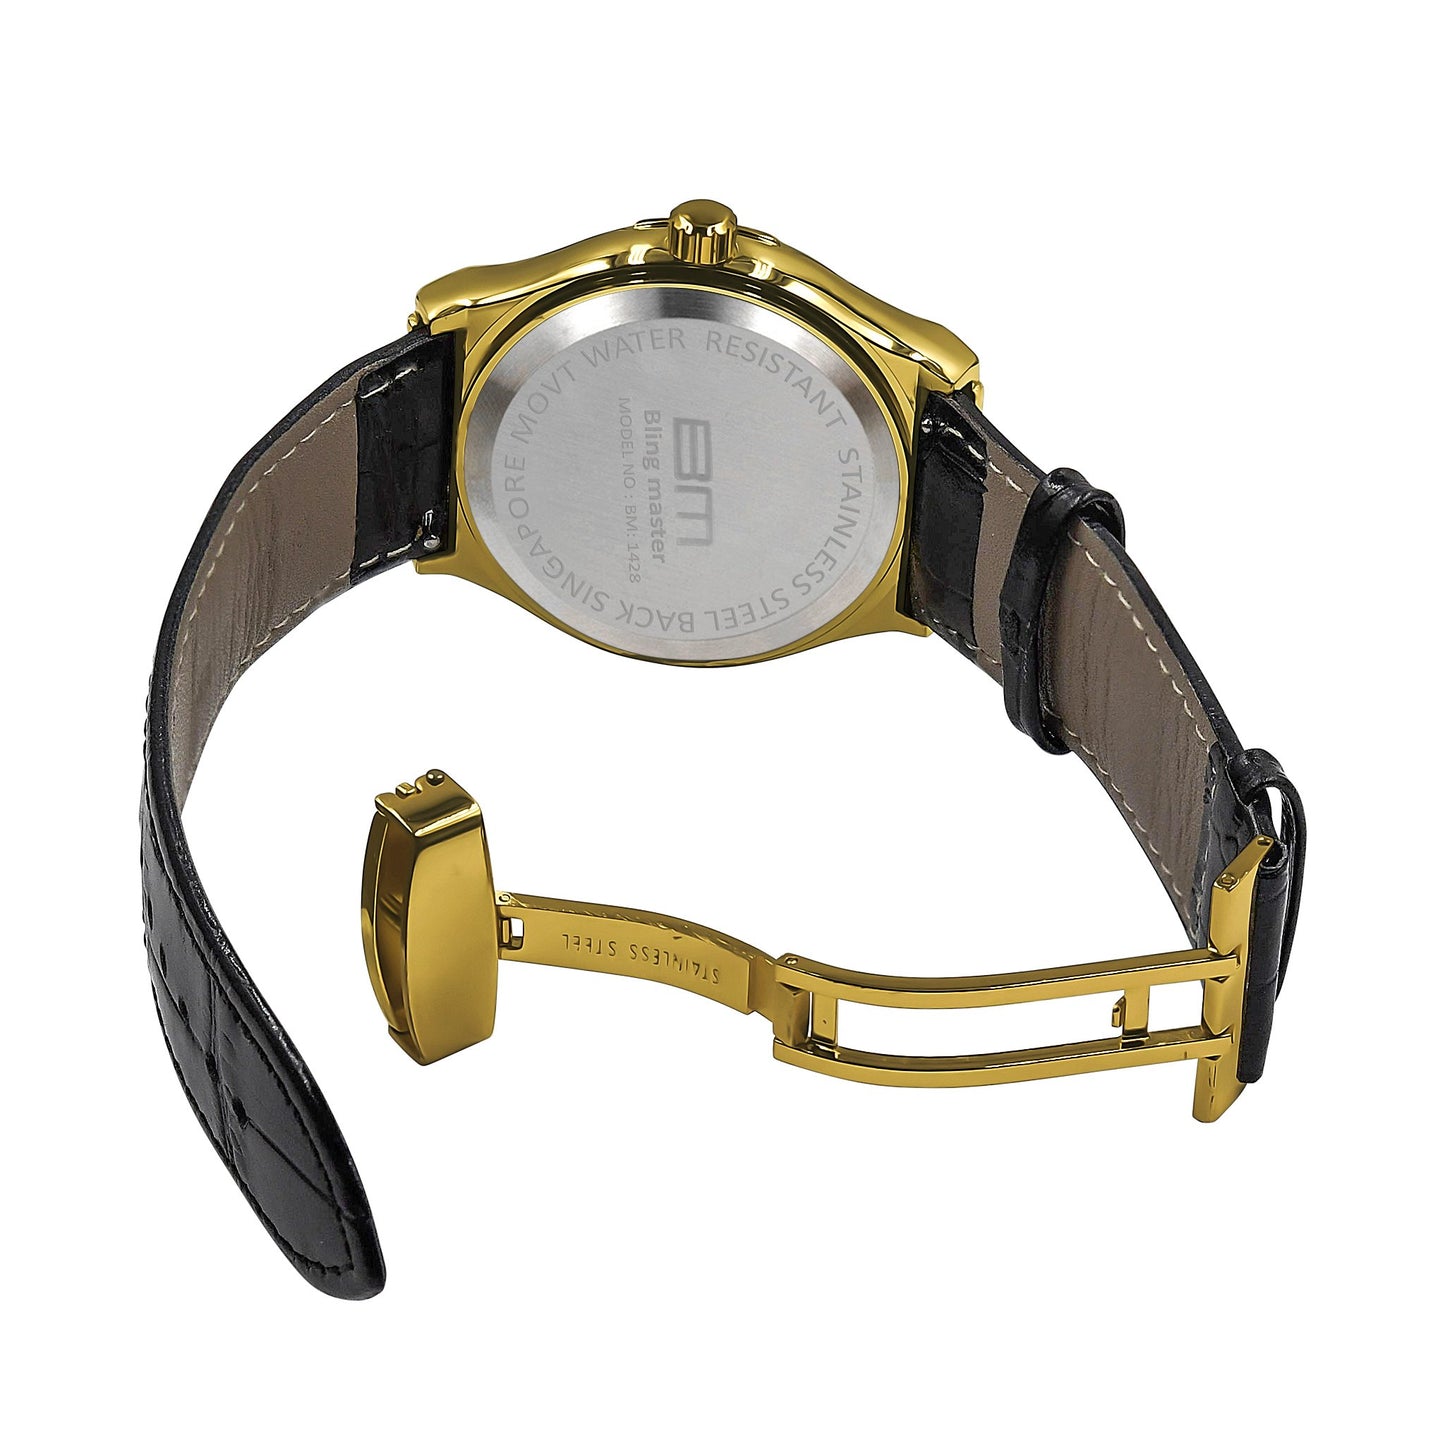 Plaltial hip hop Leather Watch | 51103522